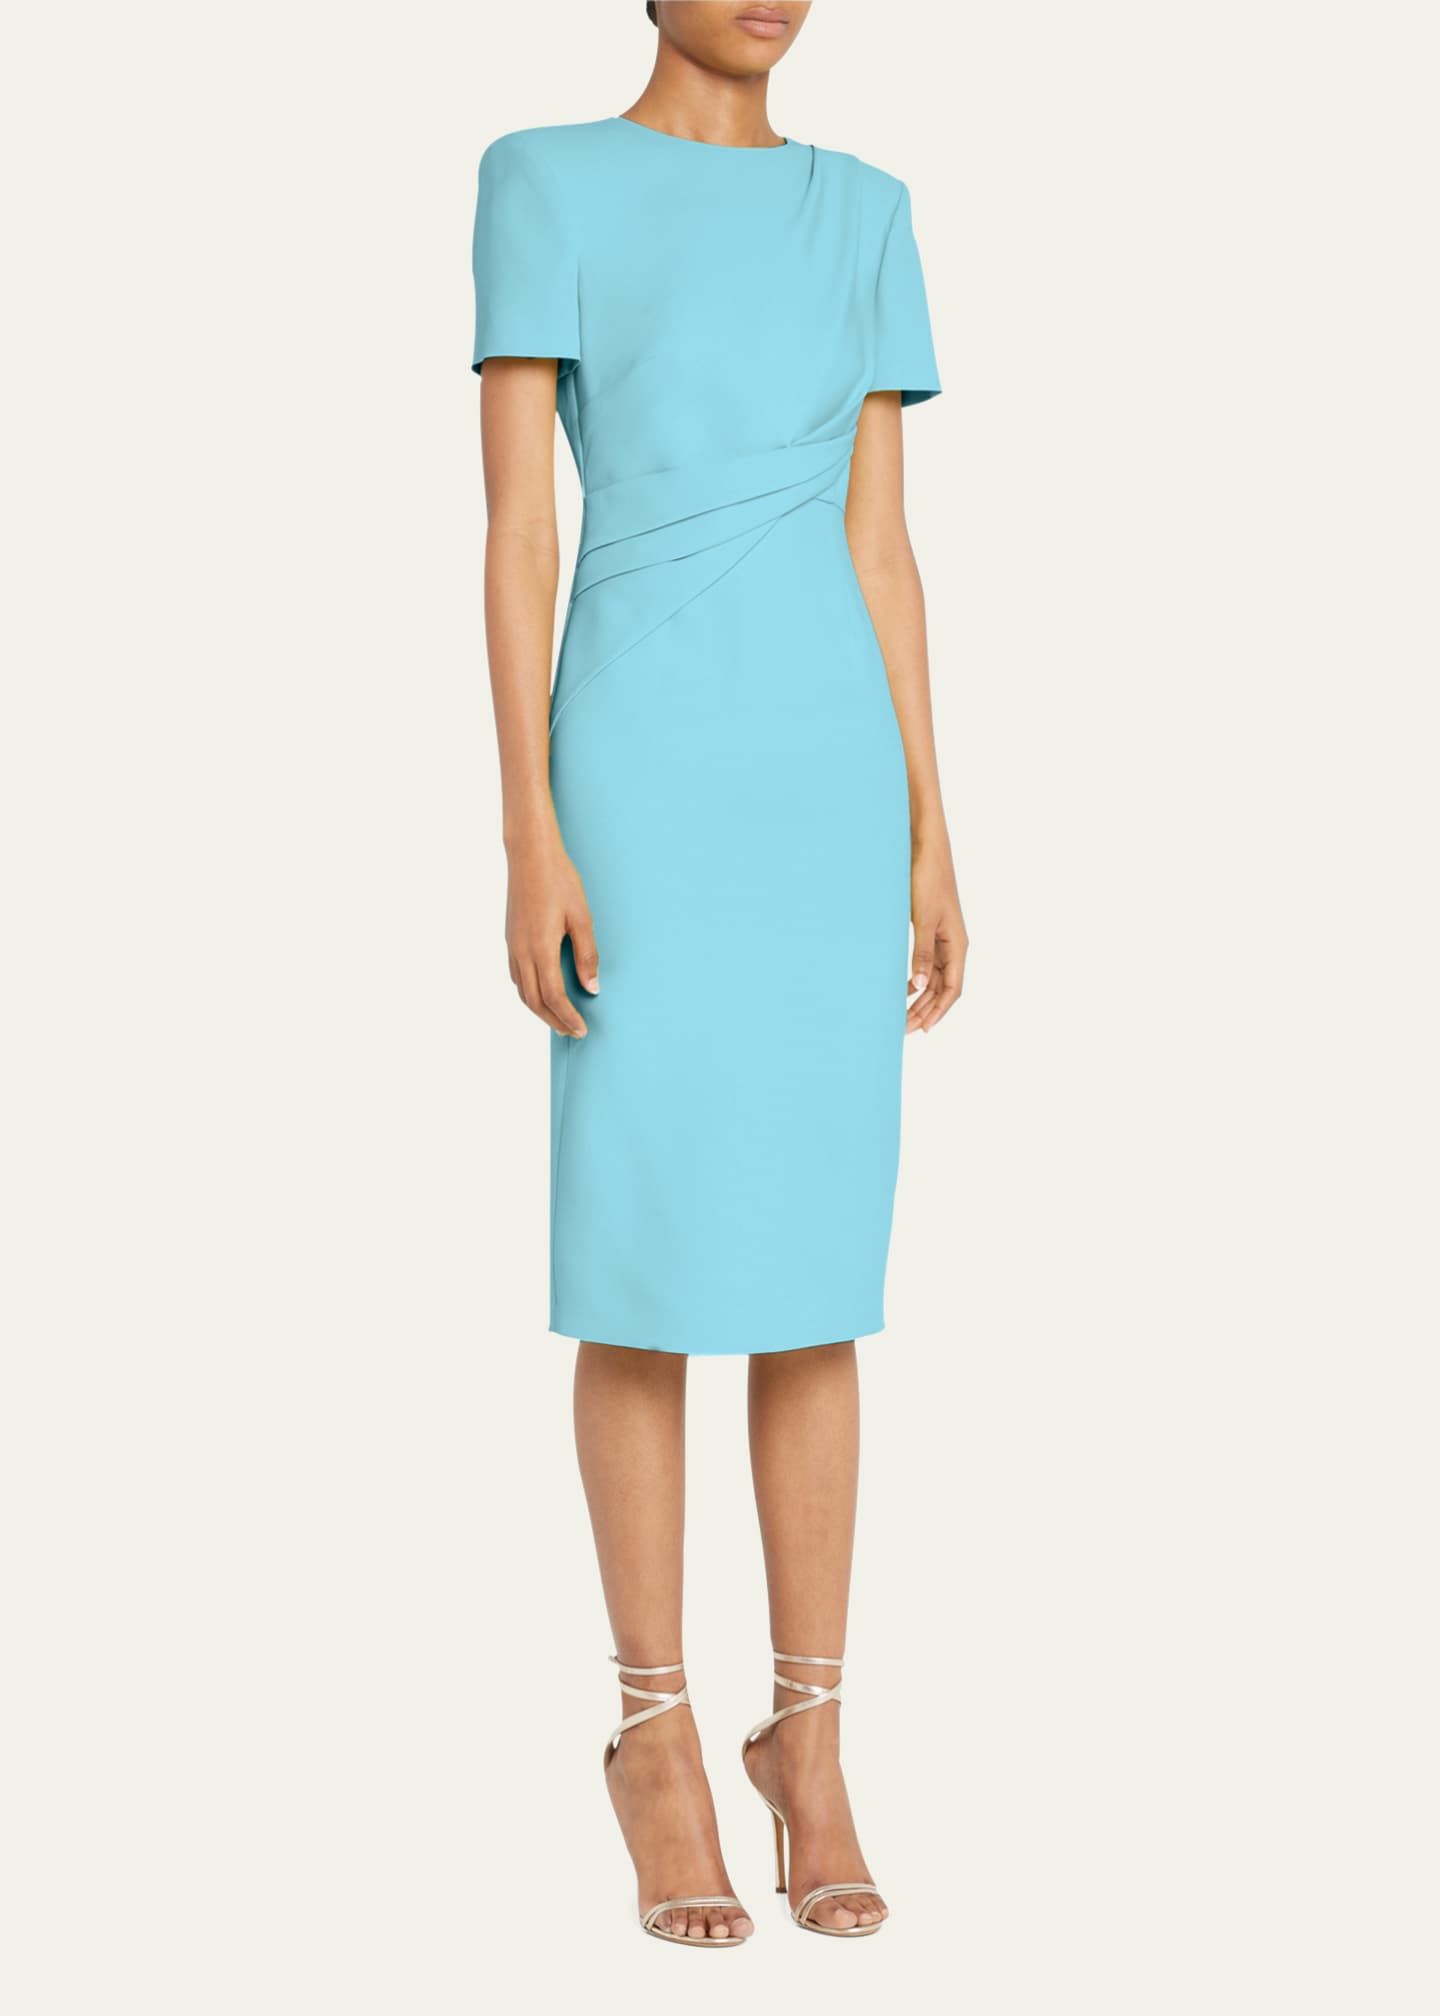 Roland Mouret Silk Midi Dress with Pleated Front - Bergdorf Goodman